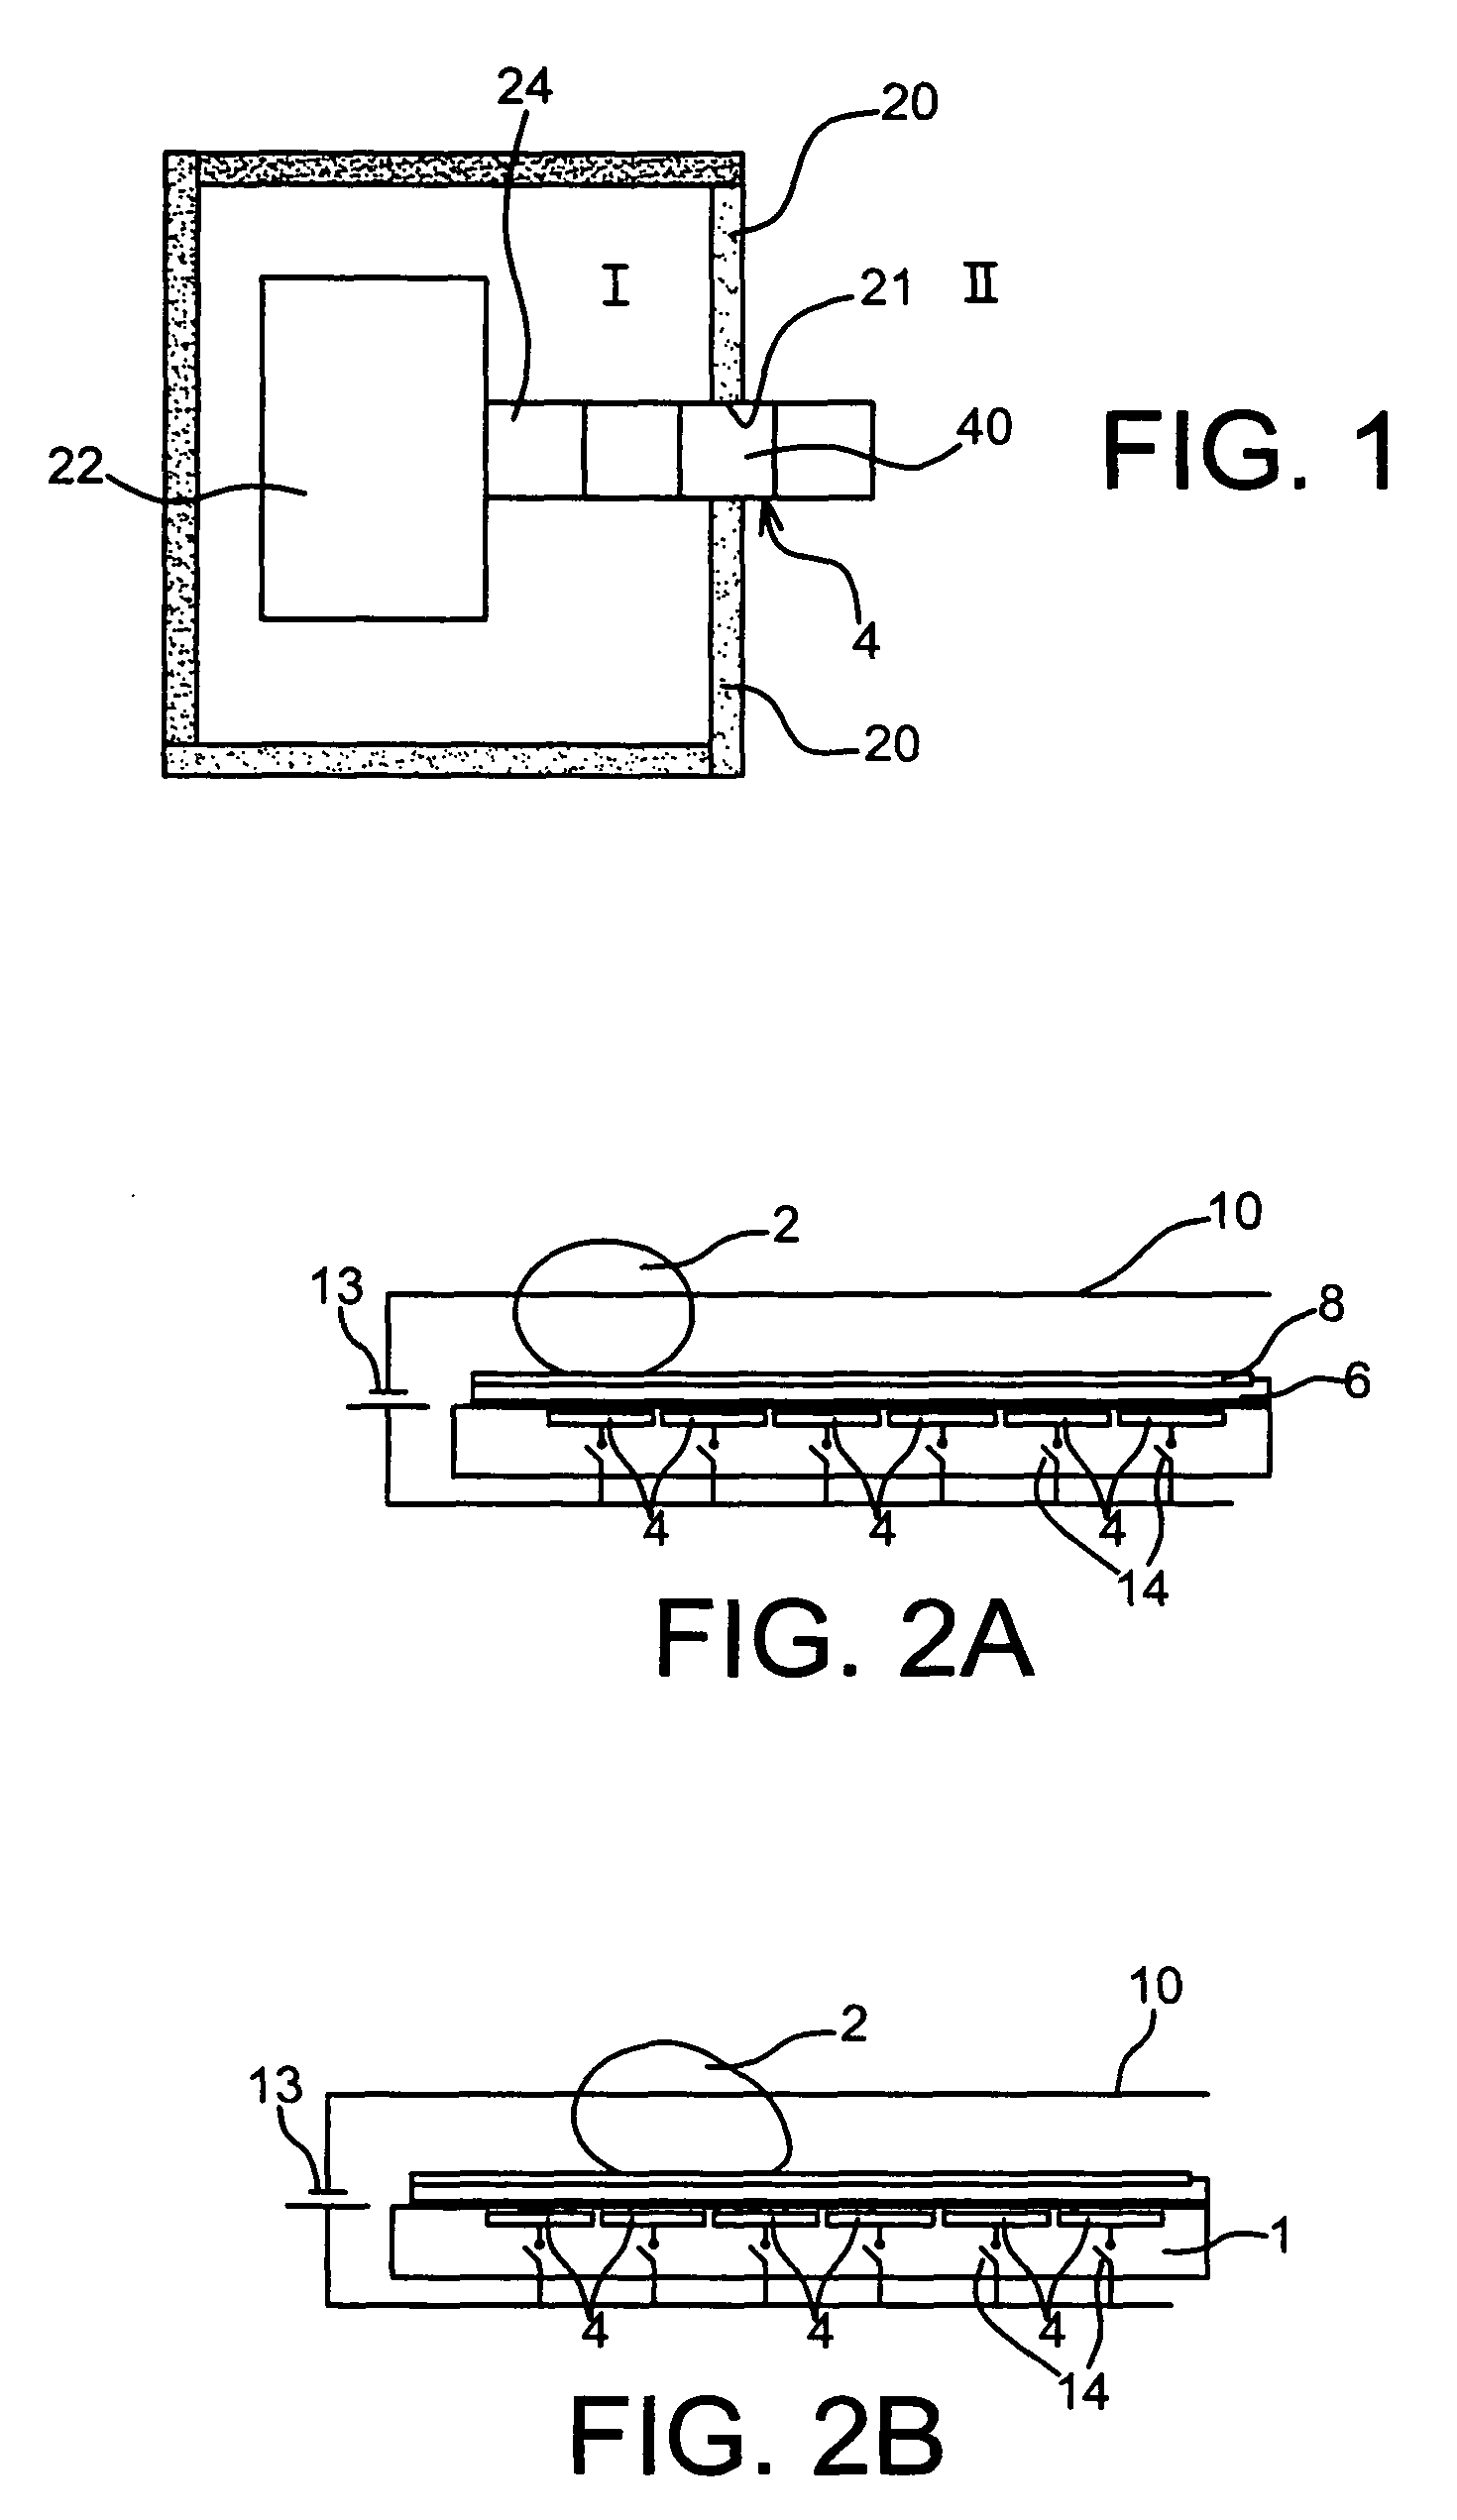 Method for controlling a communication between two areas by electrowetting, a device including areas isolatable from each other and method for making such a device